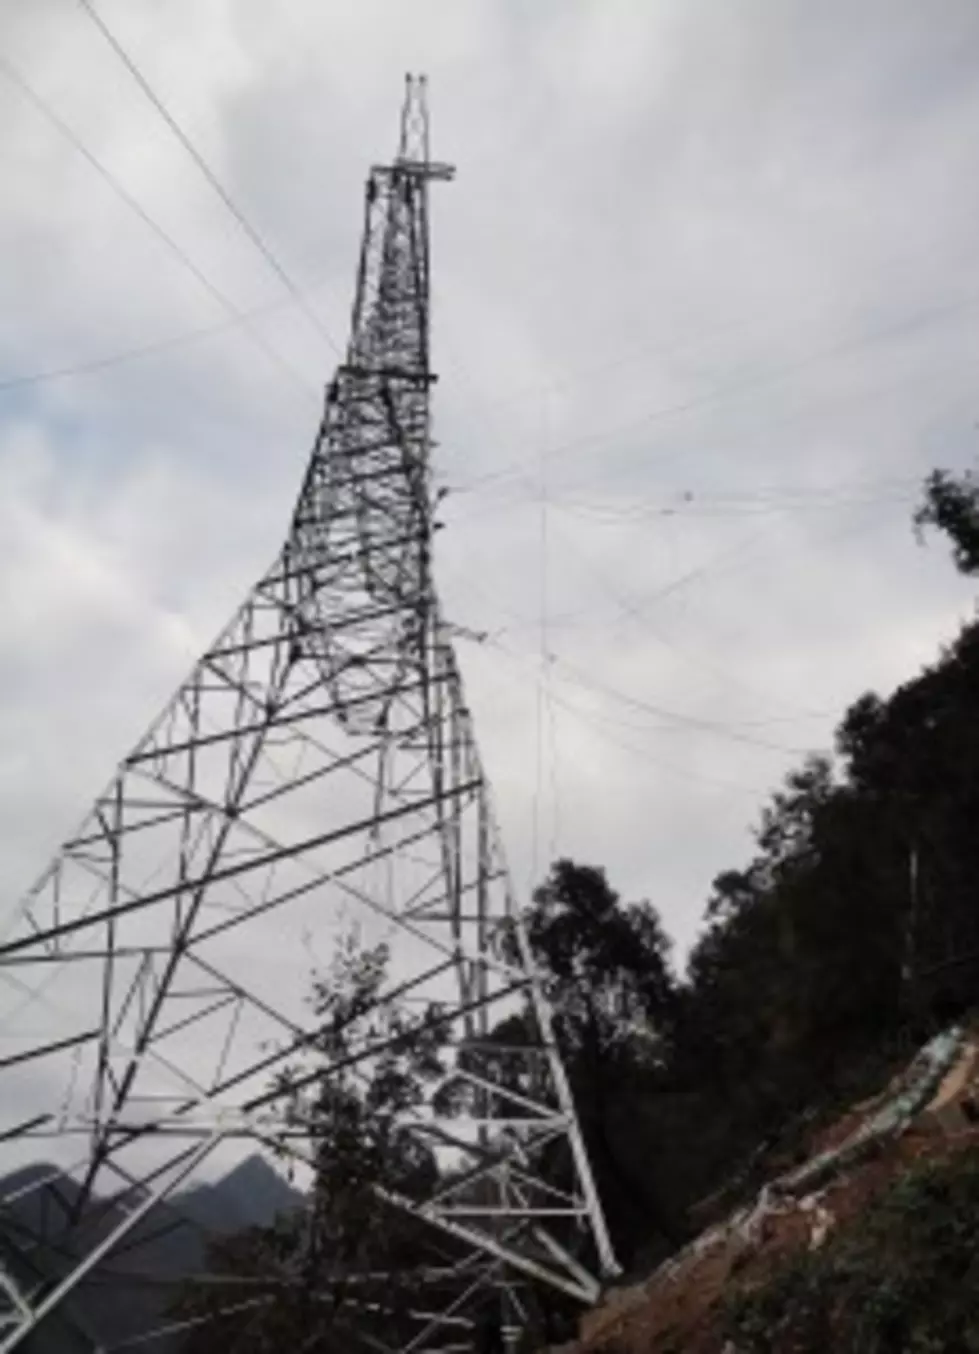 Man In Serious Condition After 83 Foot Fall From Marcy Cell Tower